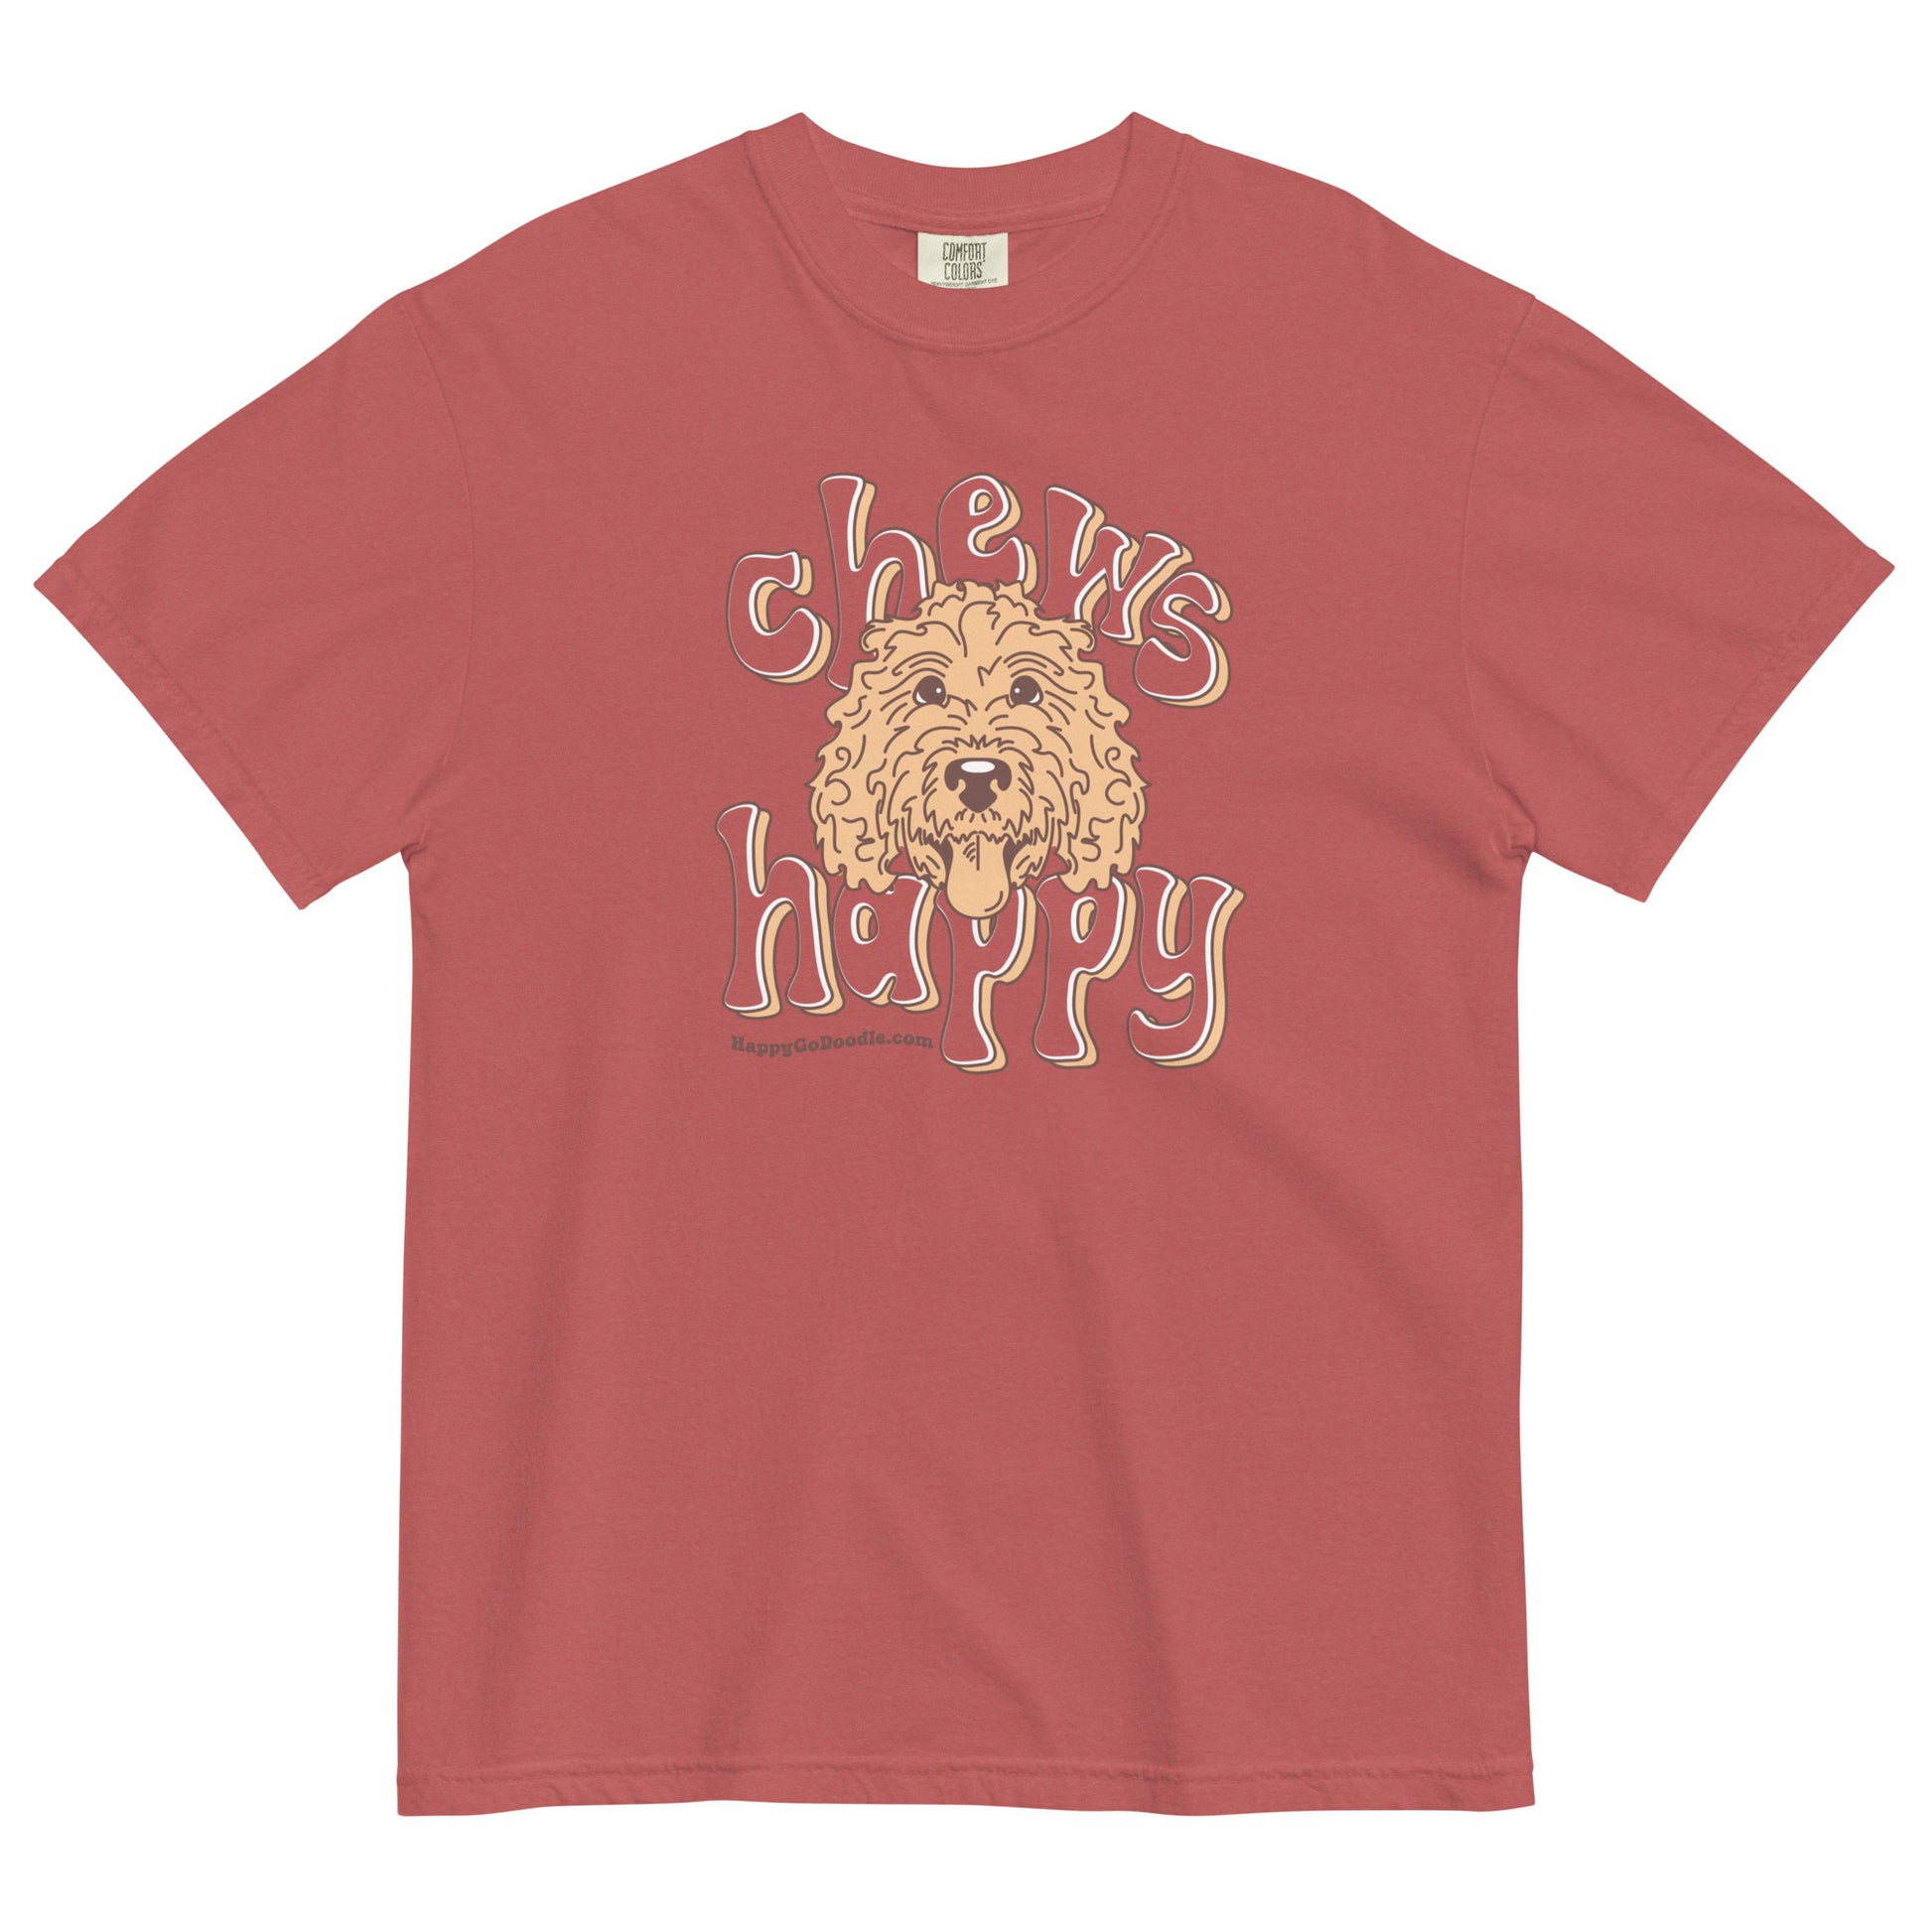 Goldendoodle comfort colors t-shirt with Goldendoodle face and words "Chews Happy" in crimson color